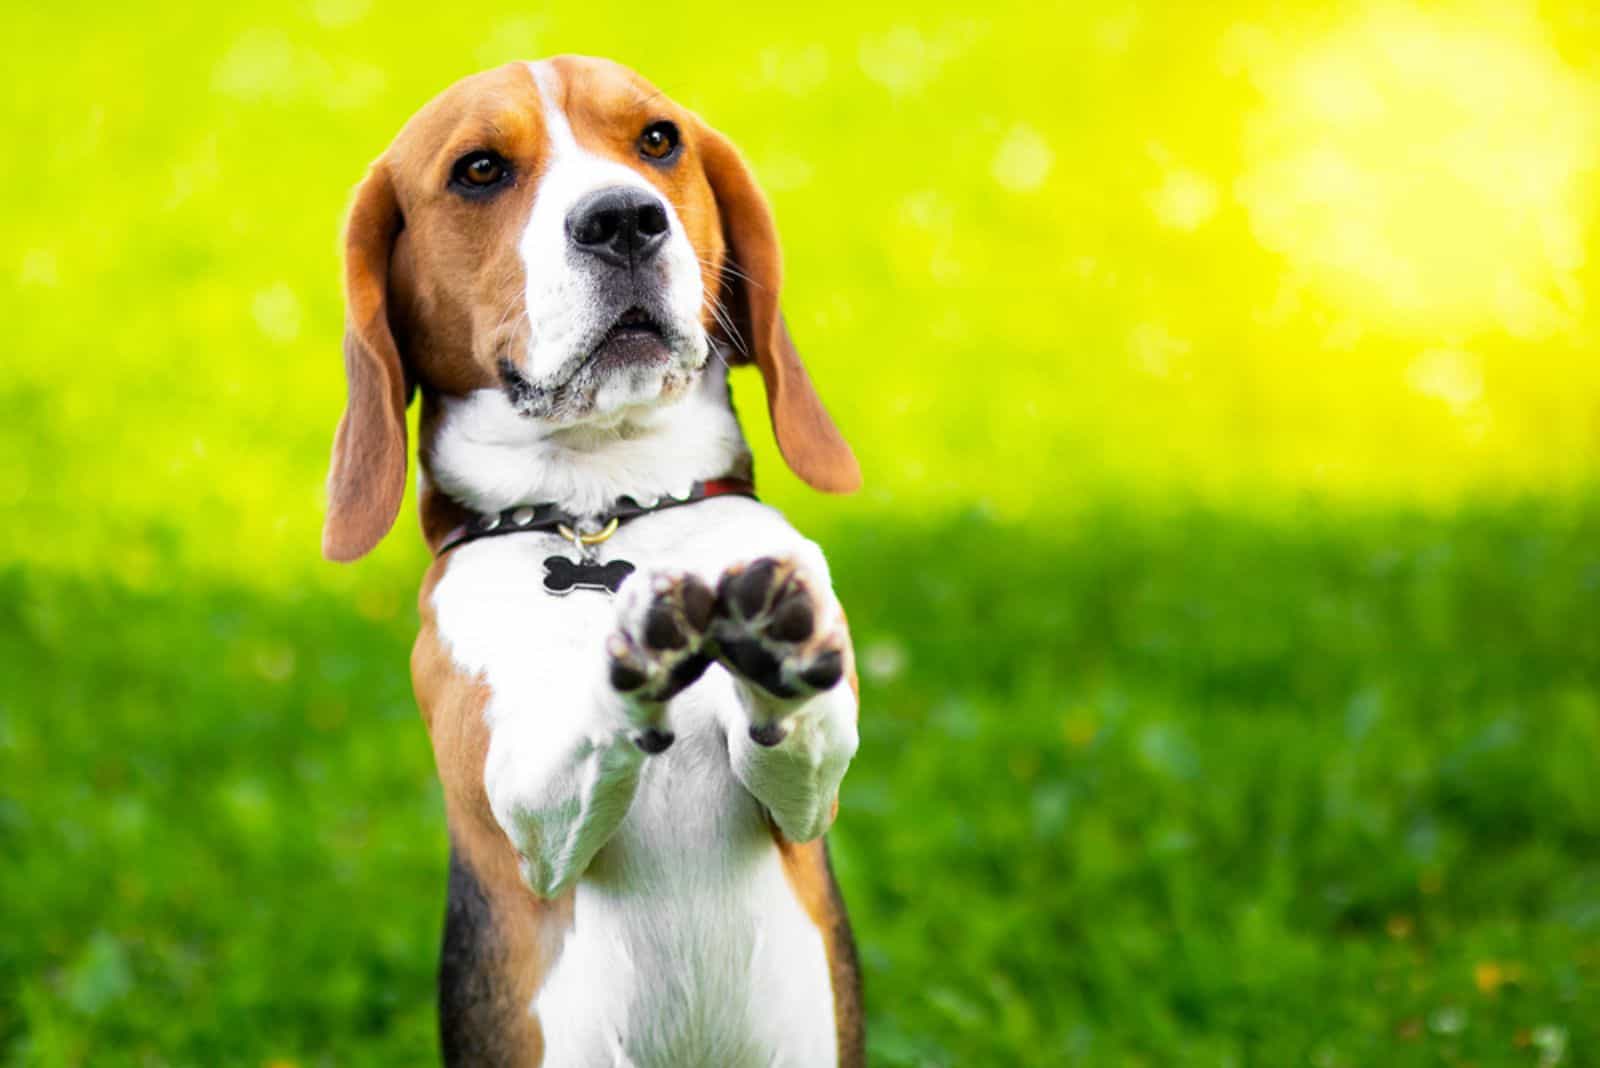 beagle performs commands on the green grass